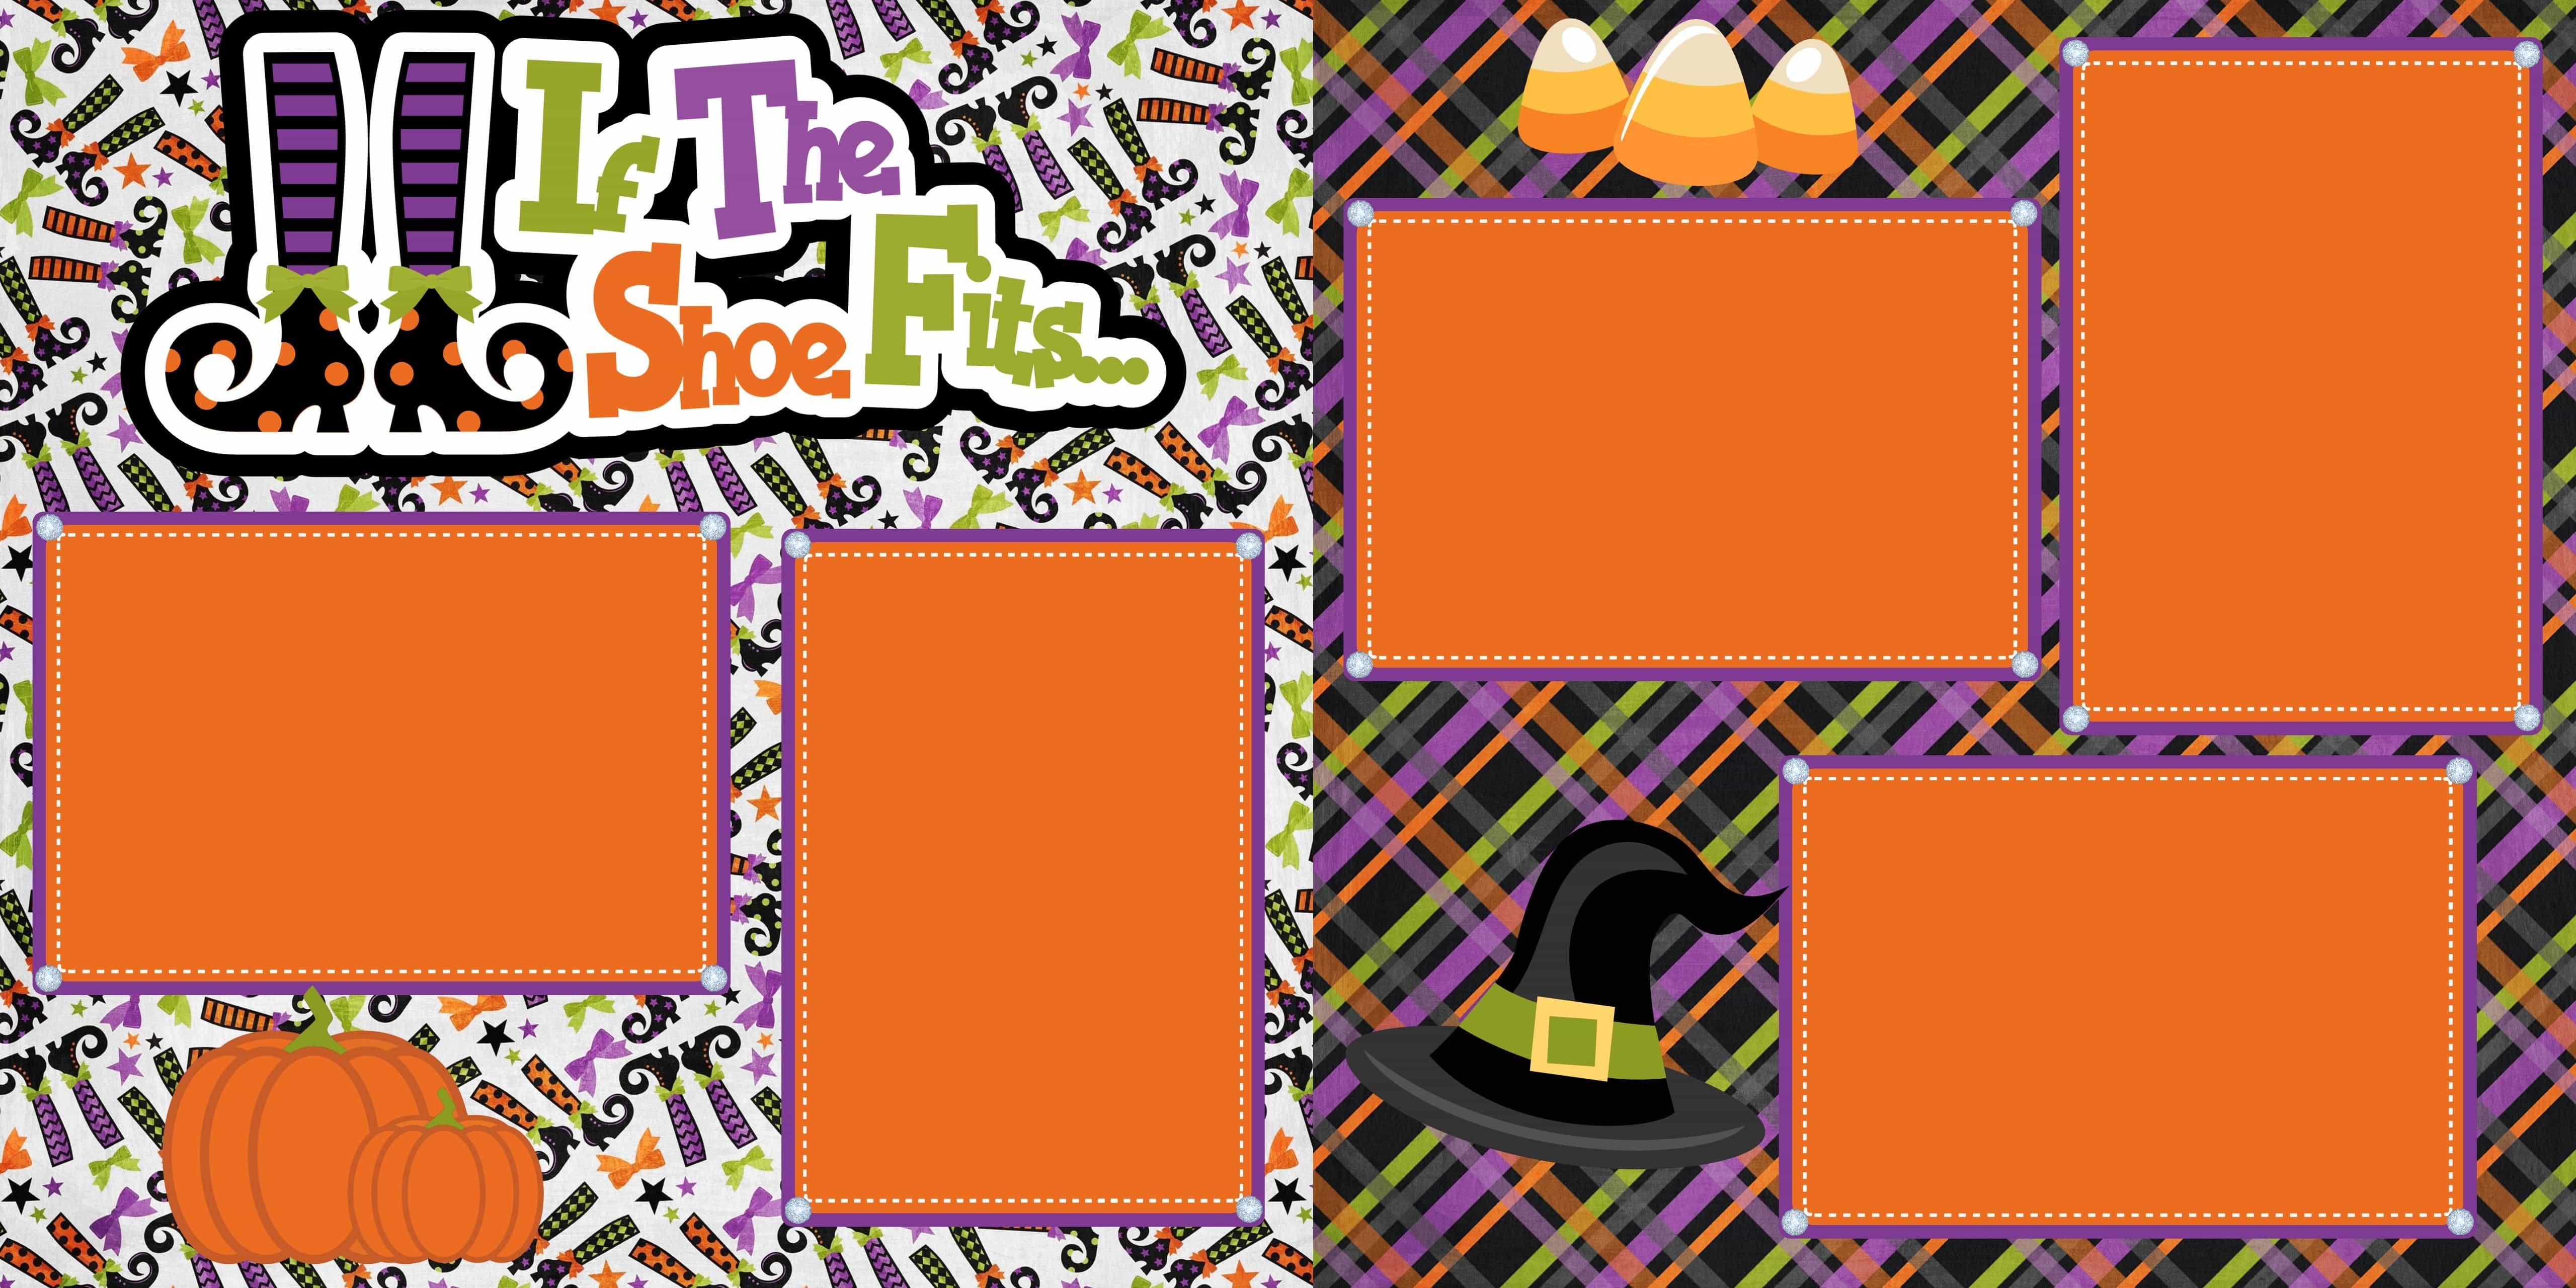 If The Shoe Fits Halloween (2) - 12 x 12 Premade, Printed Scrapbook Pages by SSC Designs